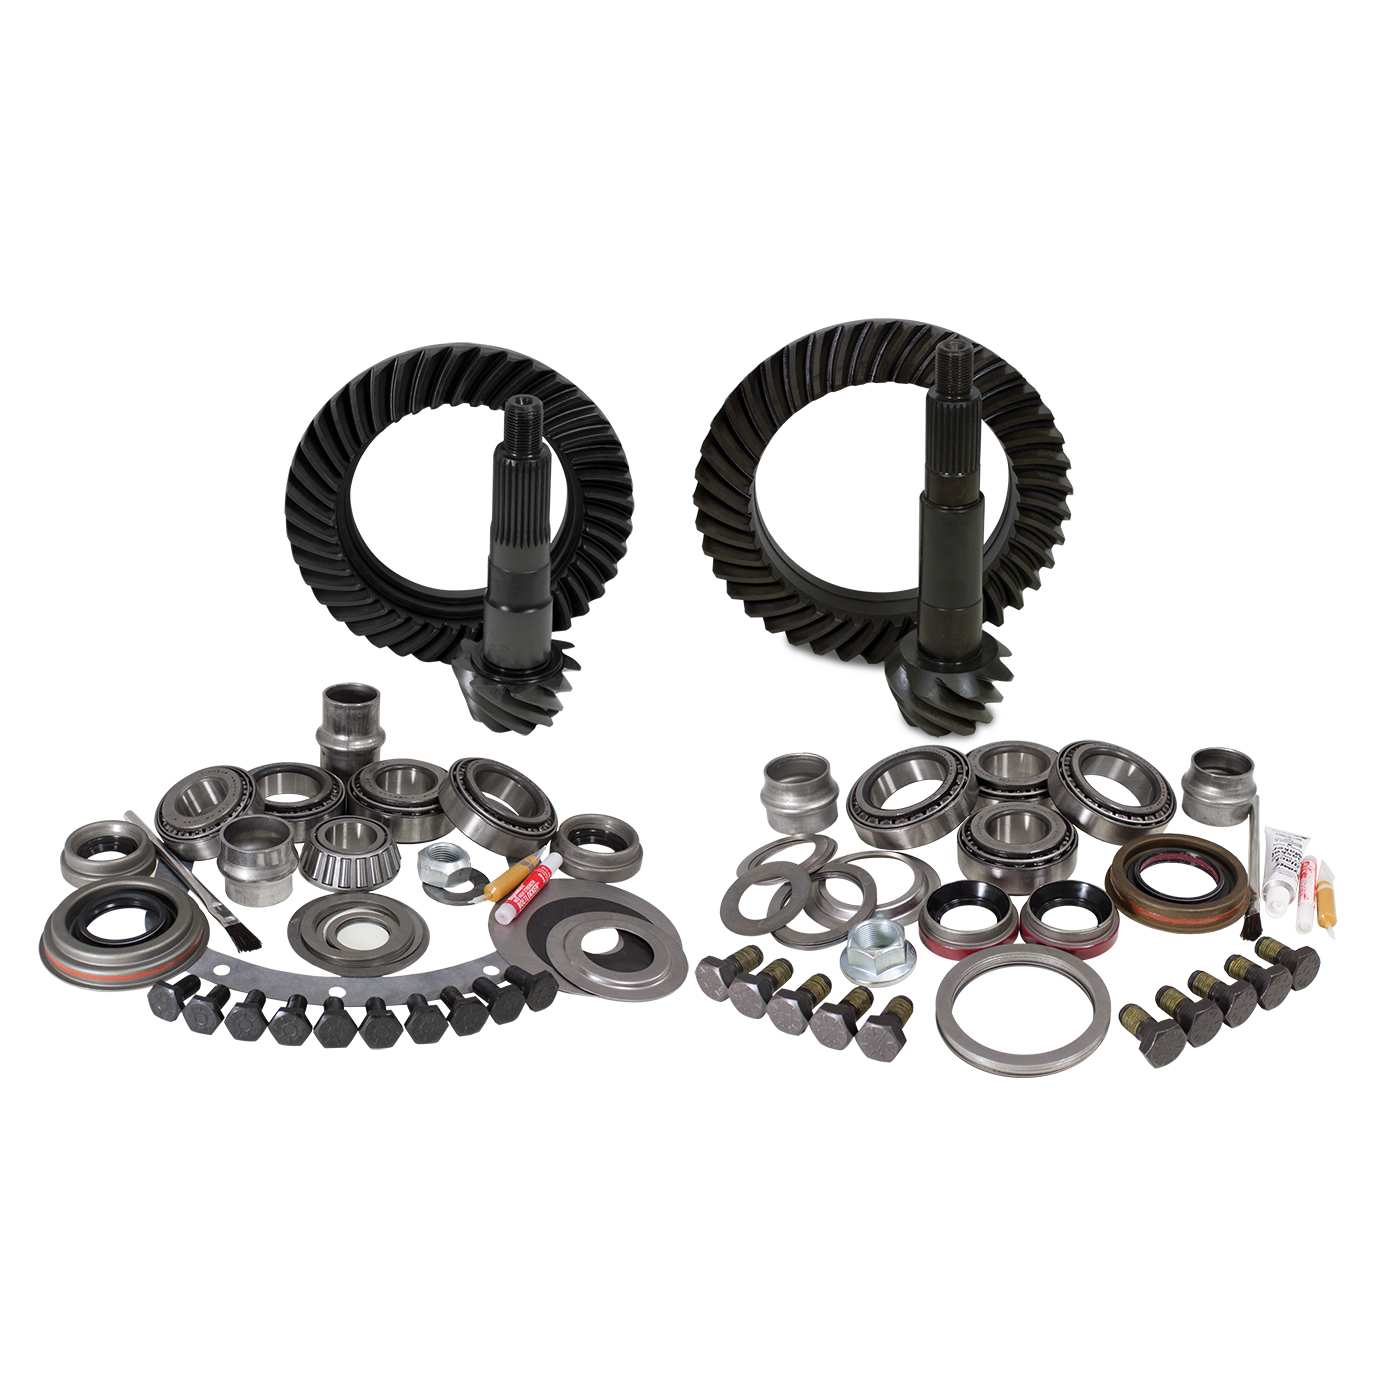 Yukon Gear & Install Kit package for Jeep TJ with Dana 30 front and Model  35 rear,  ratio. | YGK006 | Yukon Gear & Axle